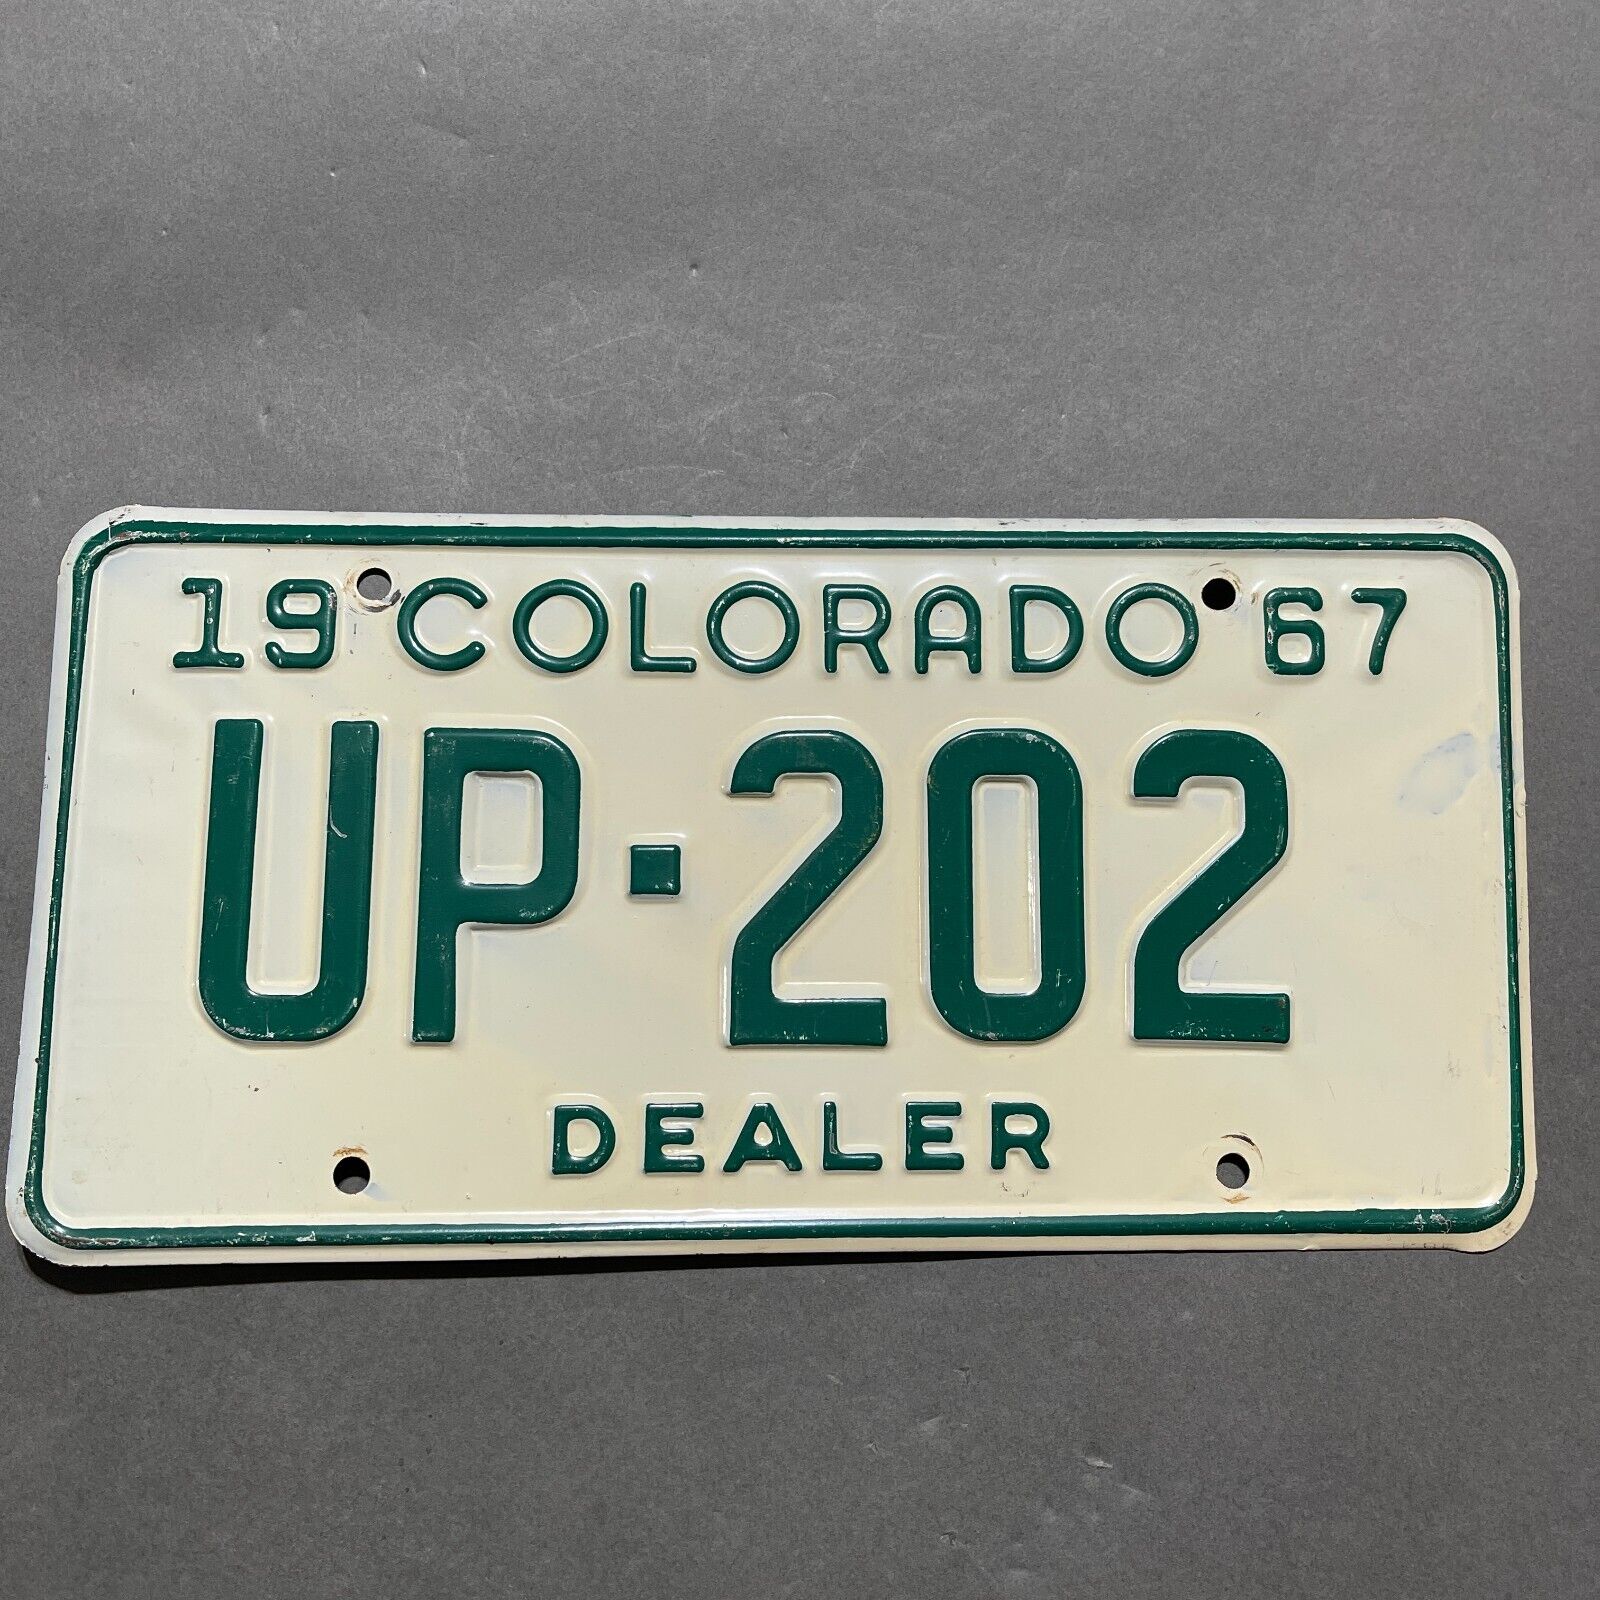 Colorado License Plate 1967 Dealer Tag Dealership Owner Auto Vehicle Repainted